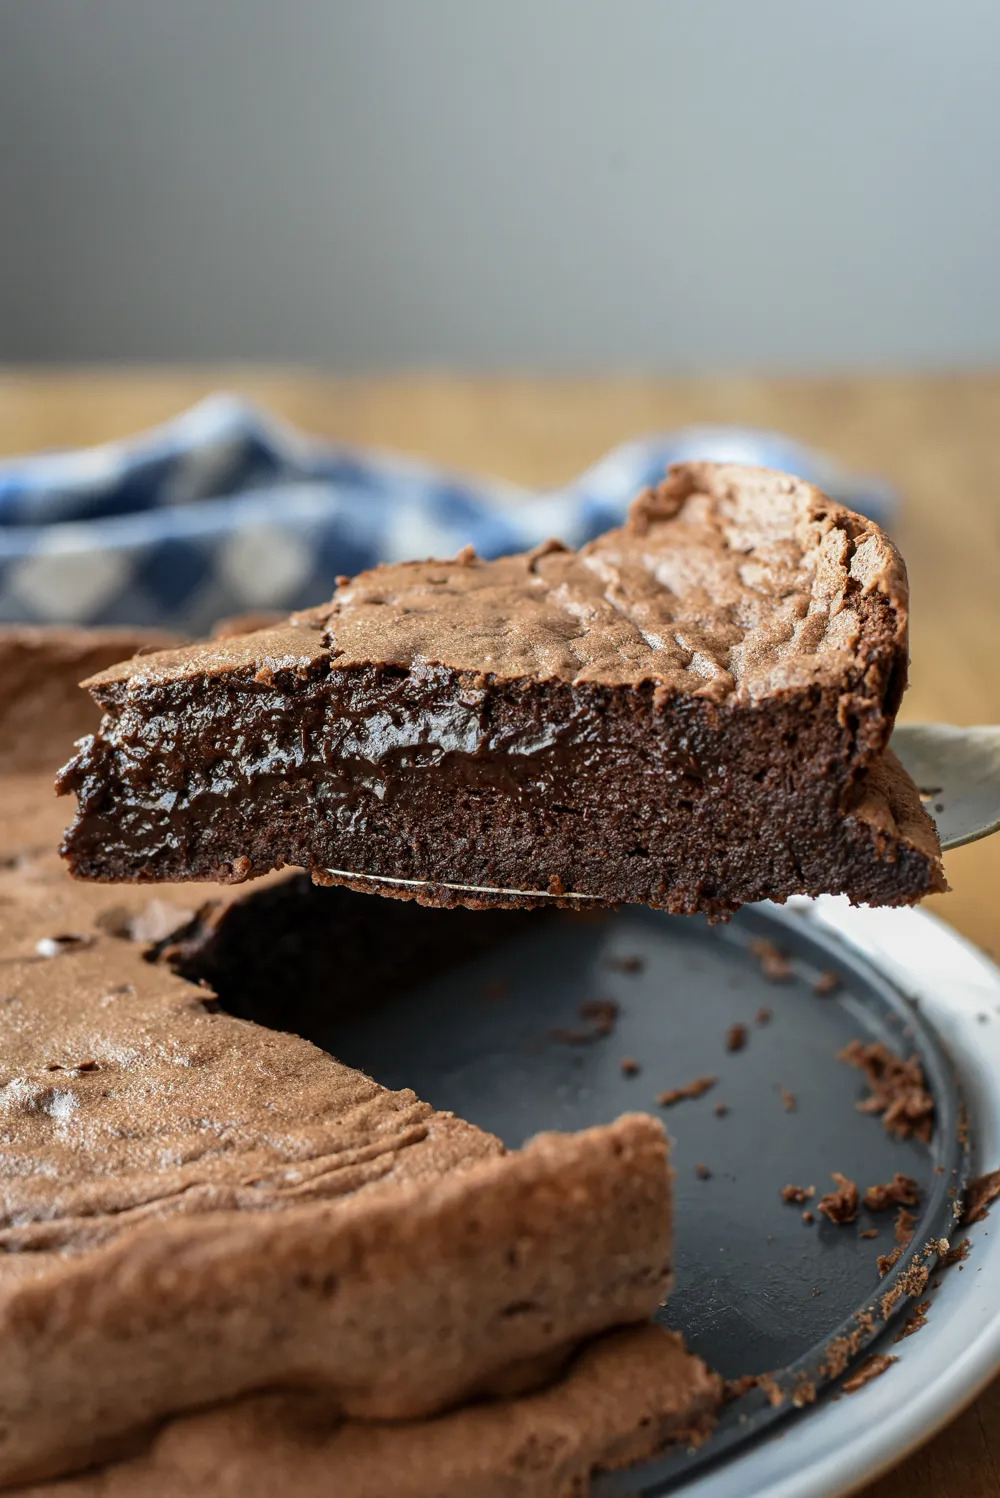 Classic-French-Chocolate-Moelleux-Cake-13